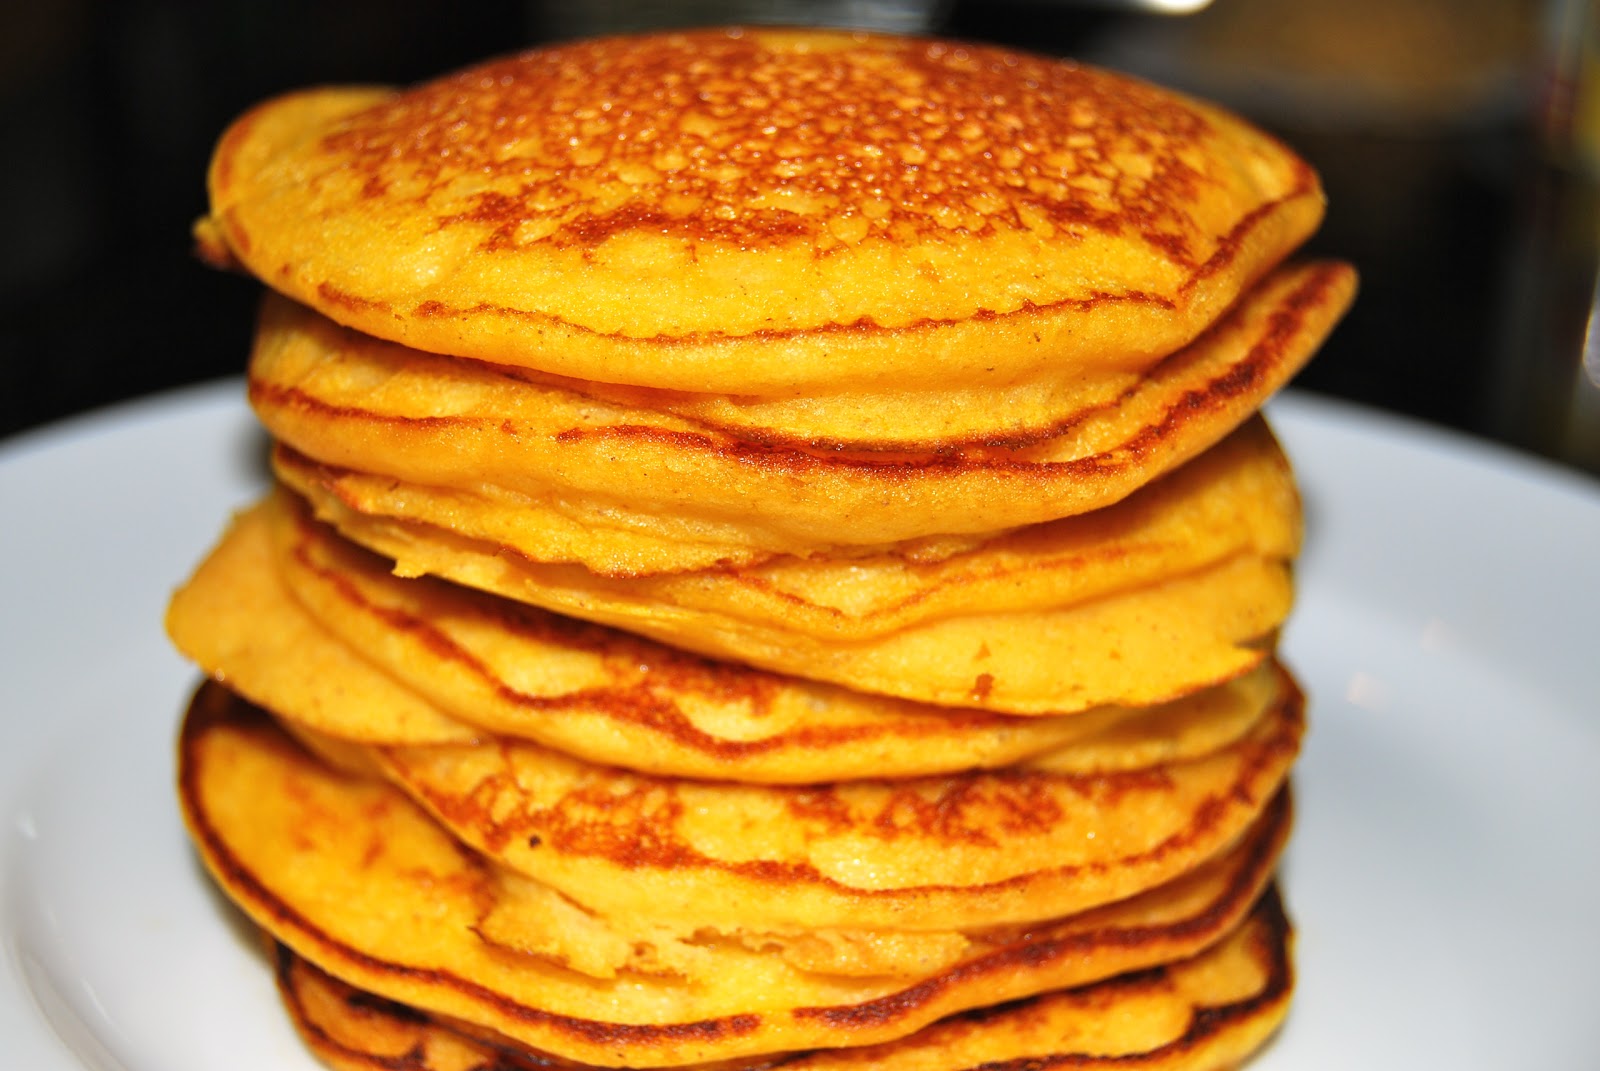 huh? how make Pancakes  morning maybe chilly to bisquick Well  pancakes on hot pancakes  Pumpkin a fluffy